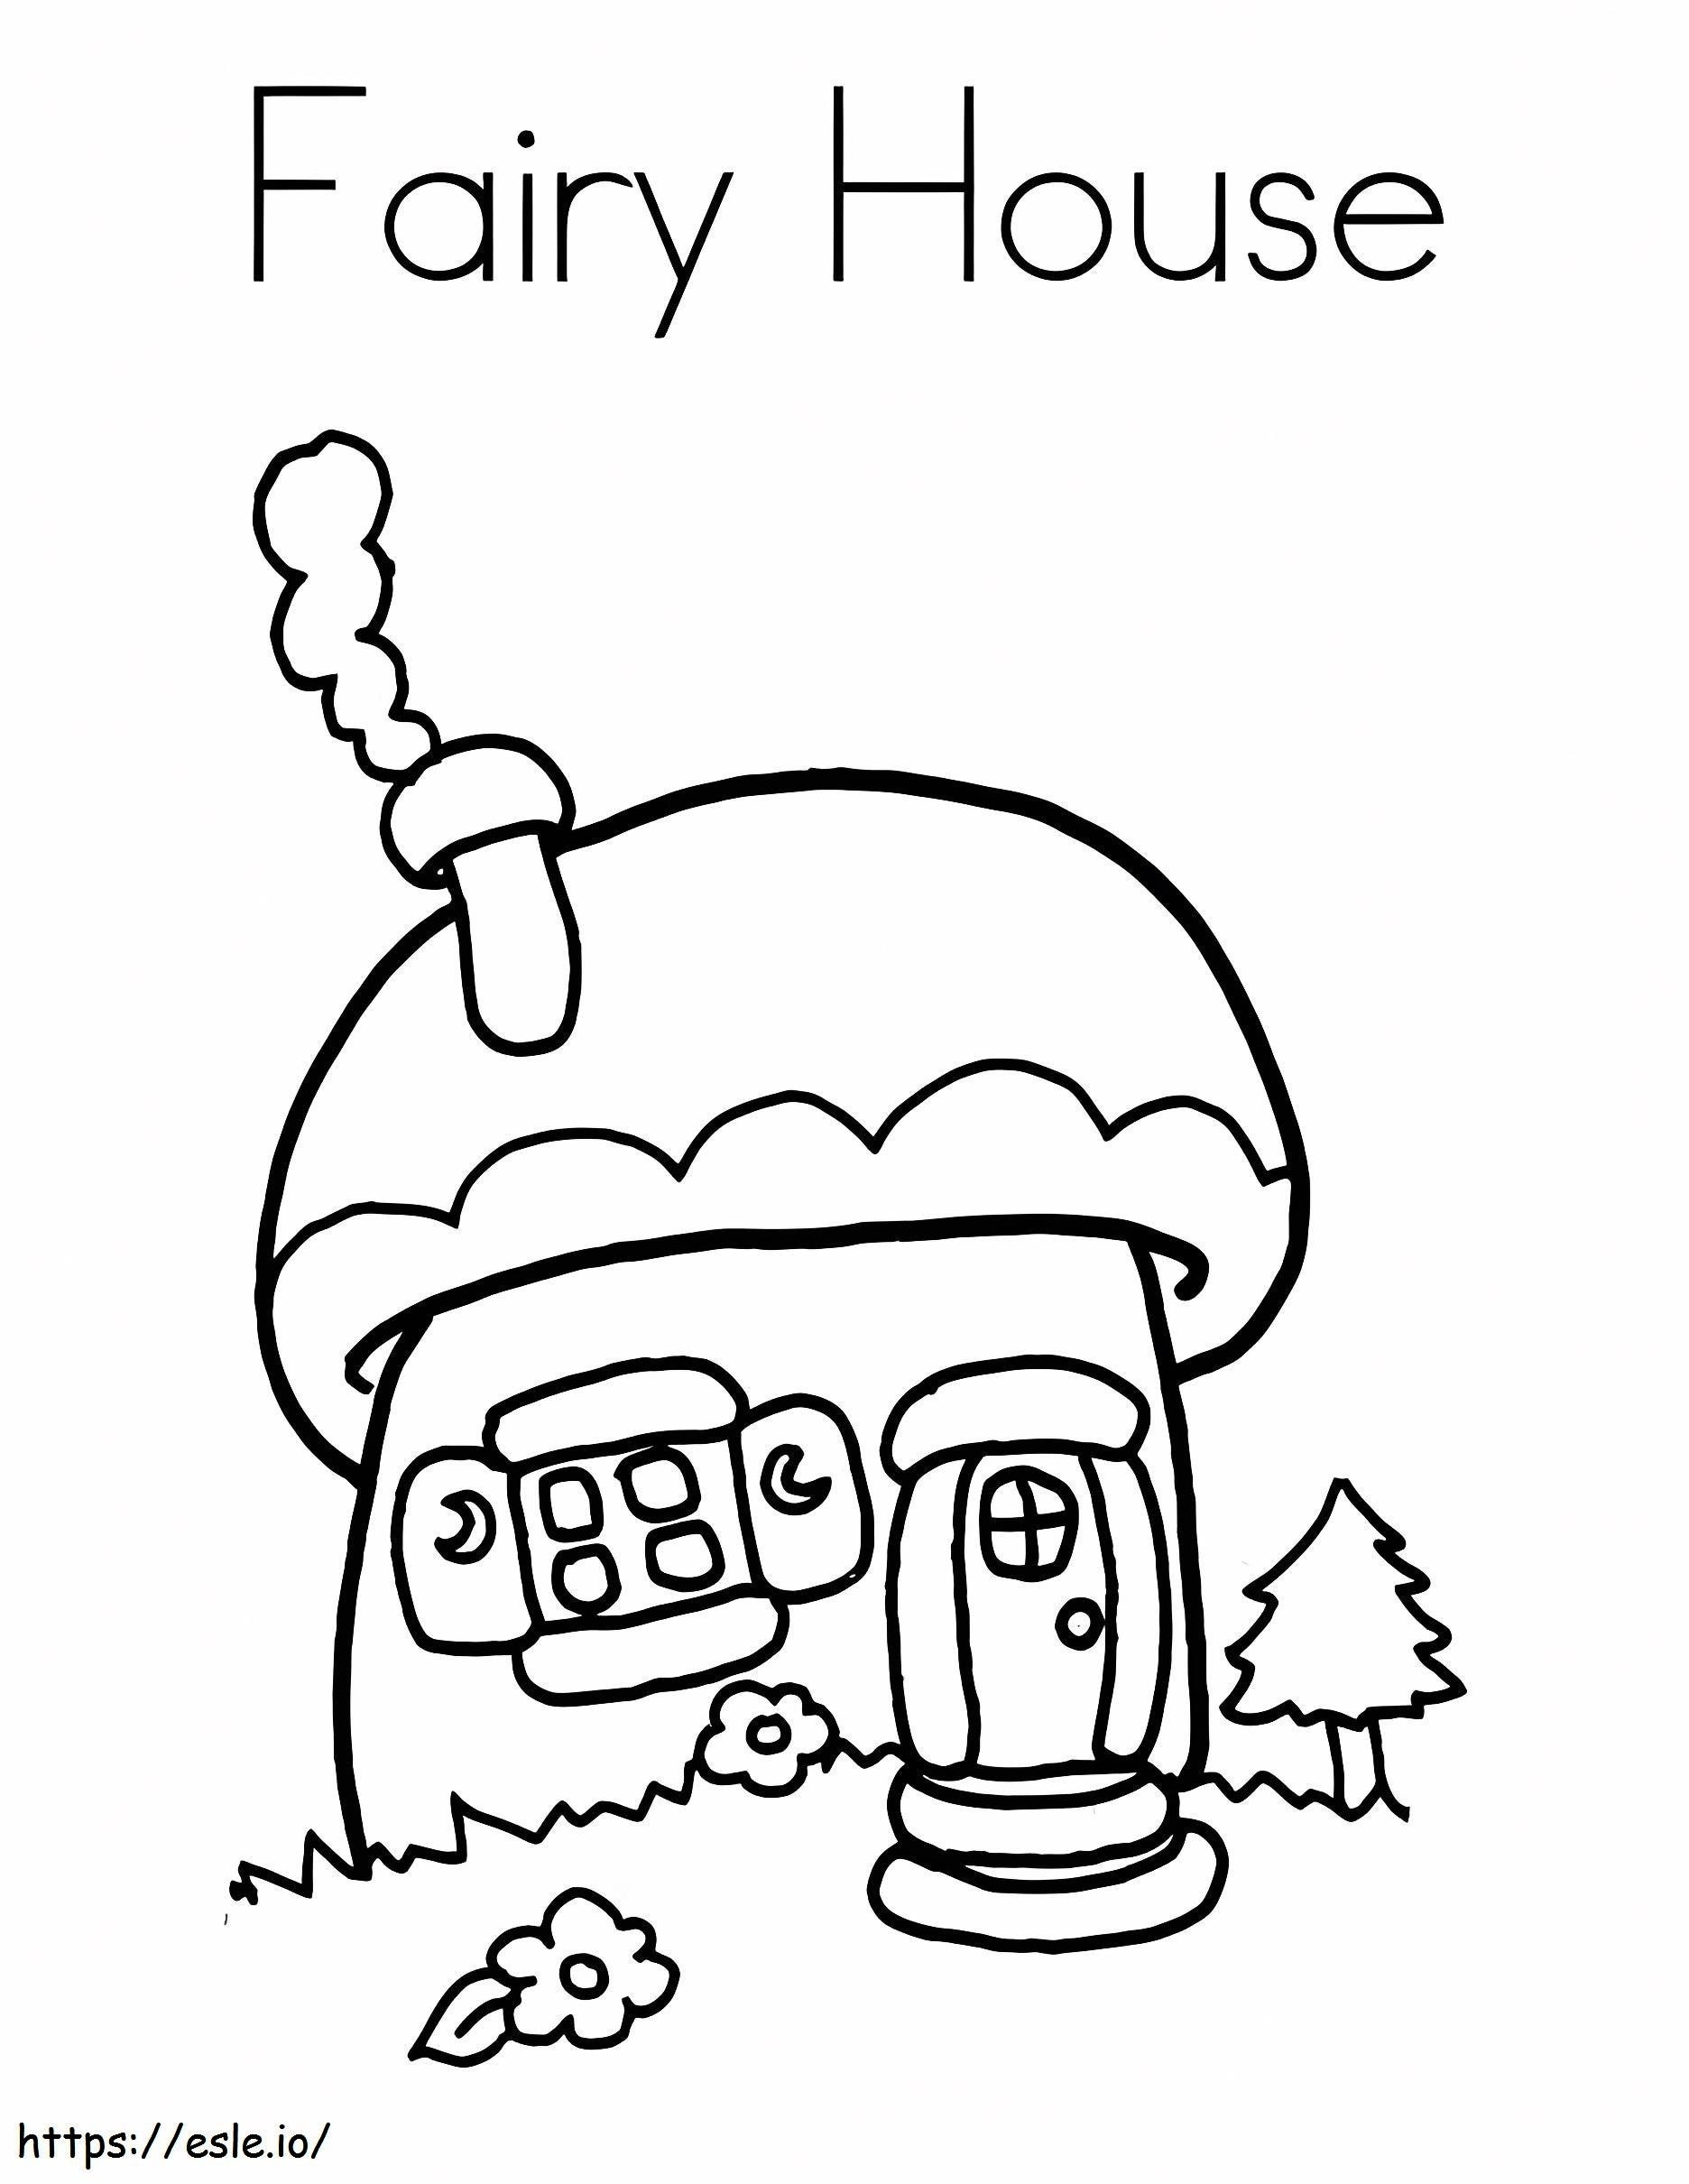 Easy Fairy House coloring page